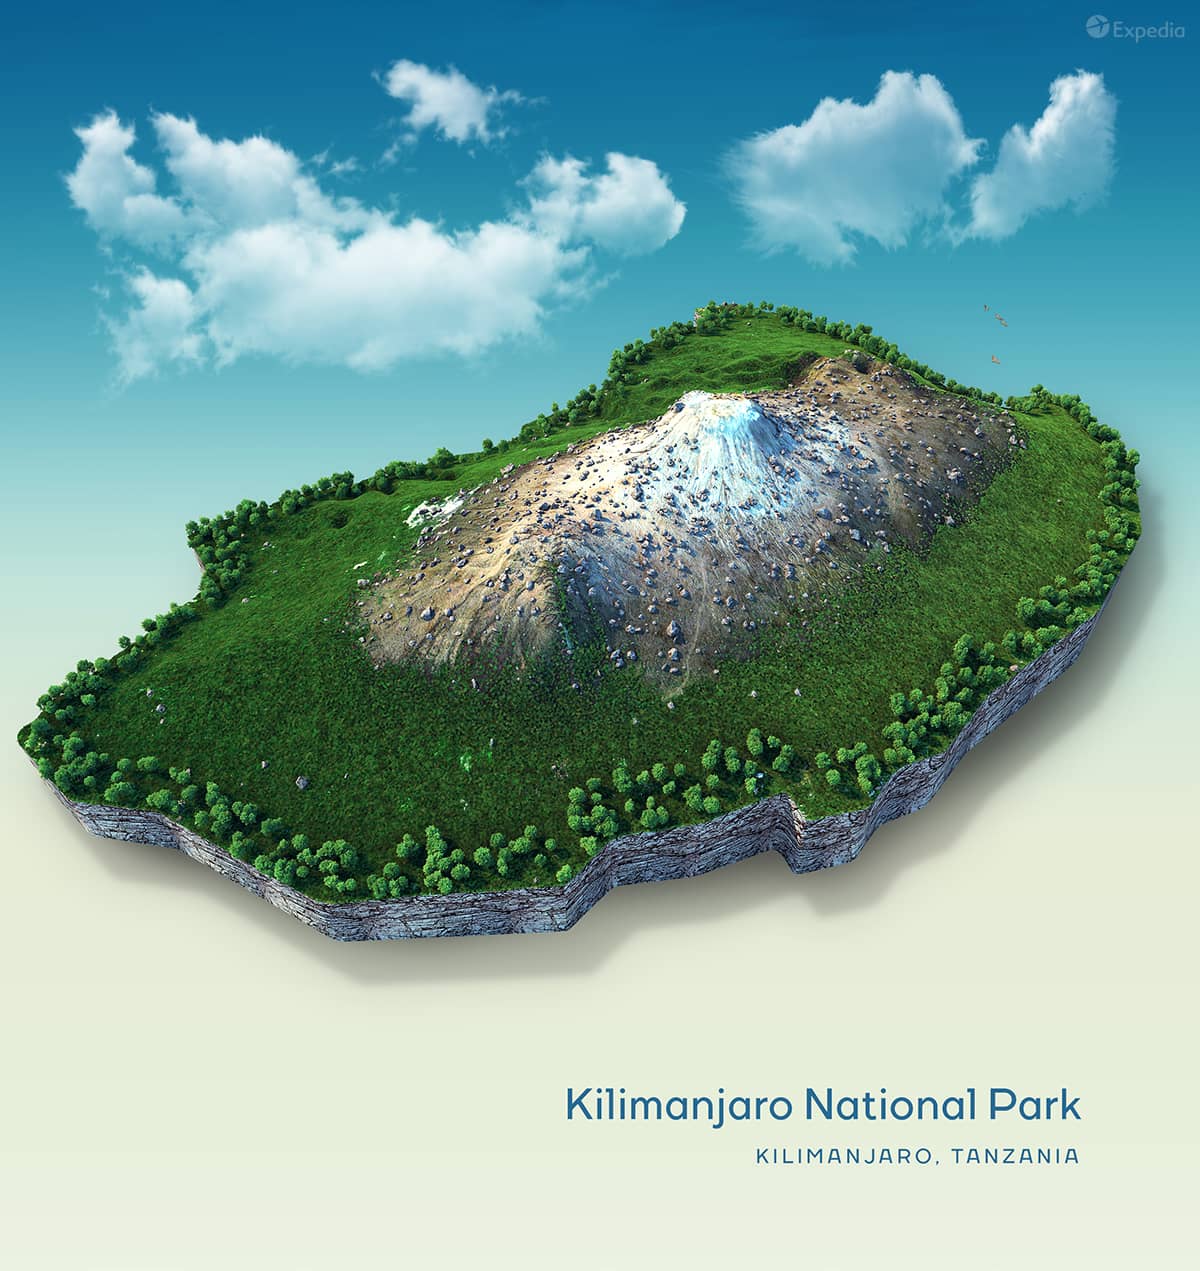 A creative topographic map rendering of Kilimanjaro National Park in Tanzania